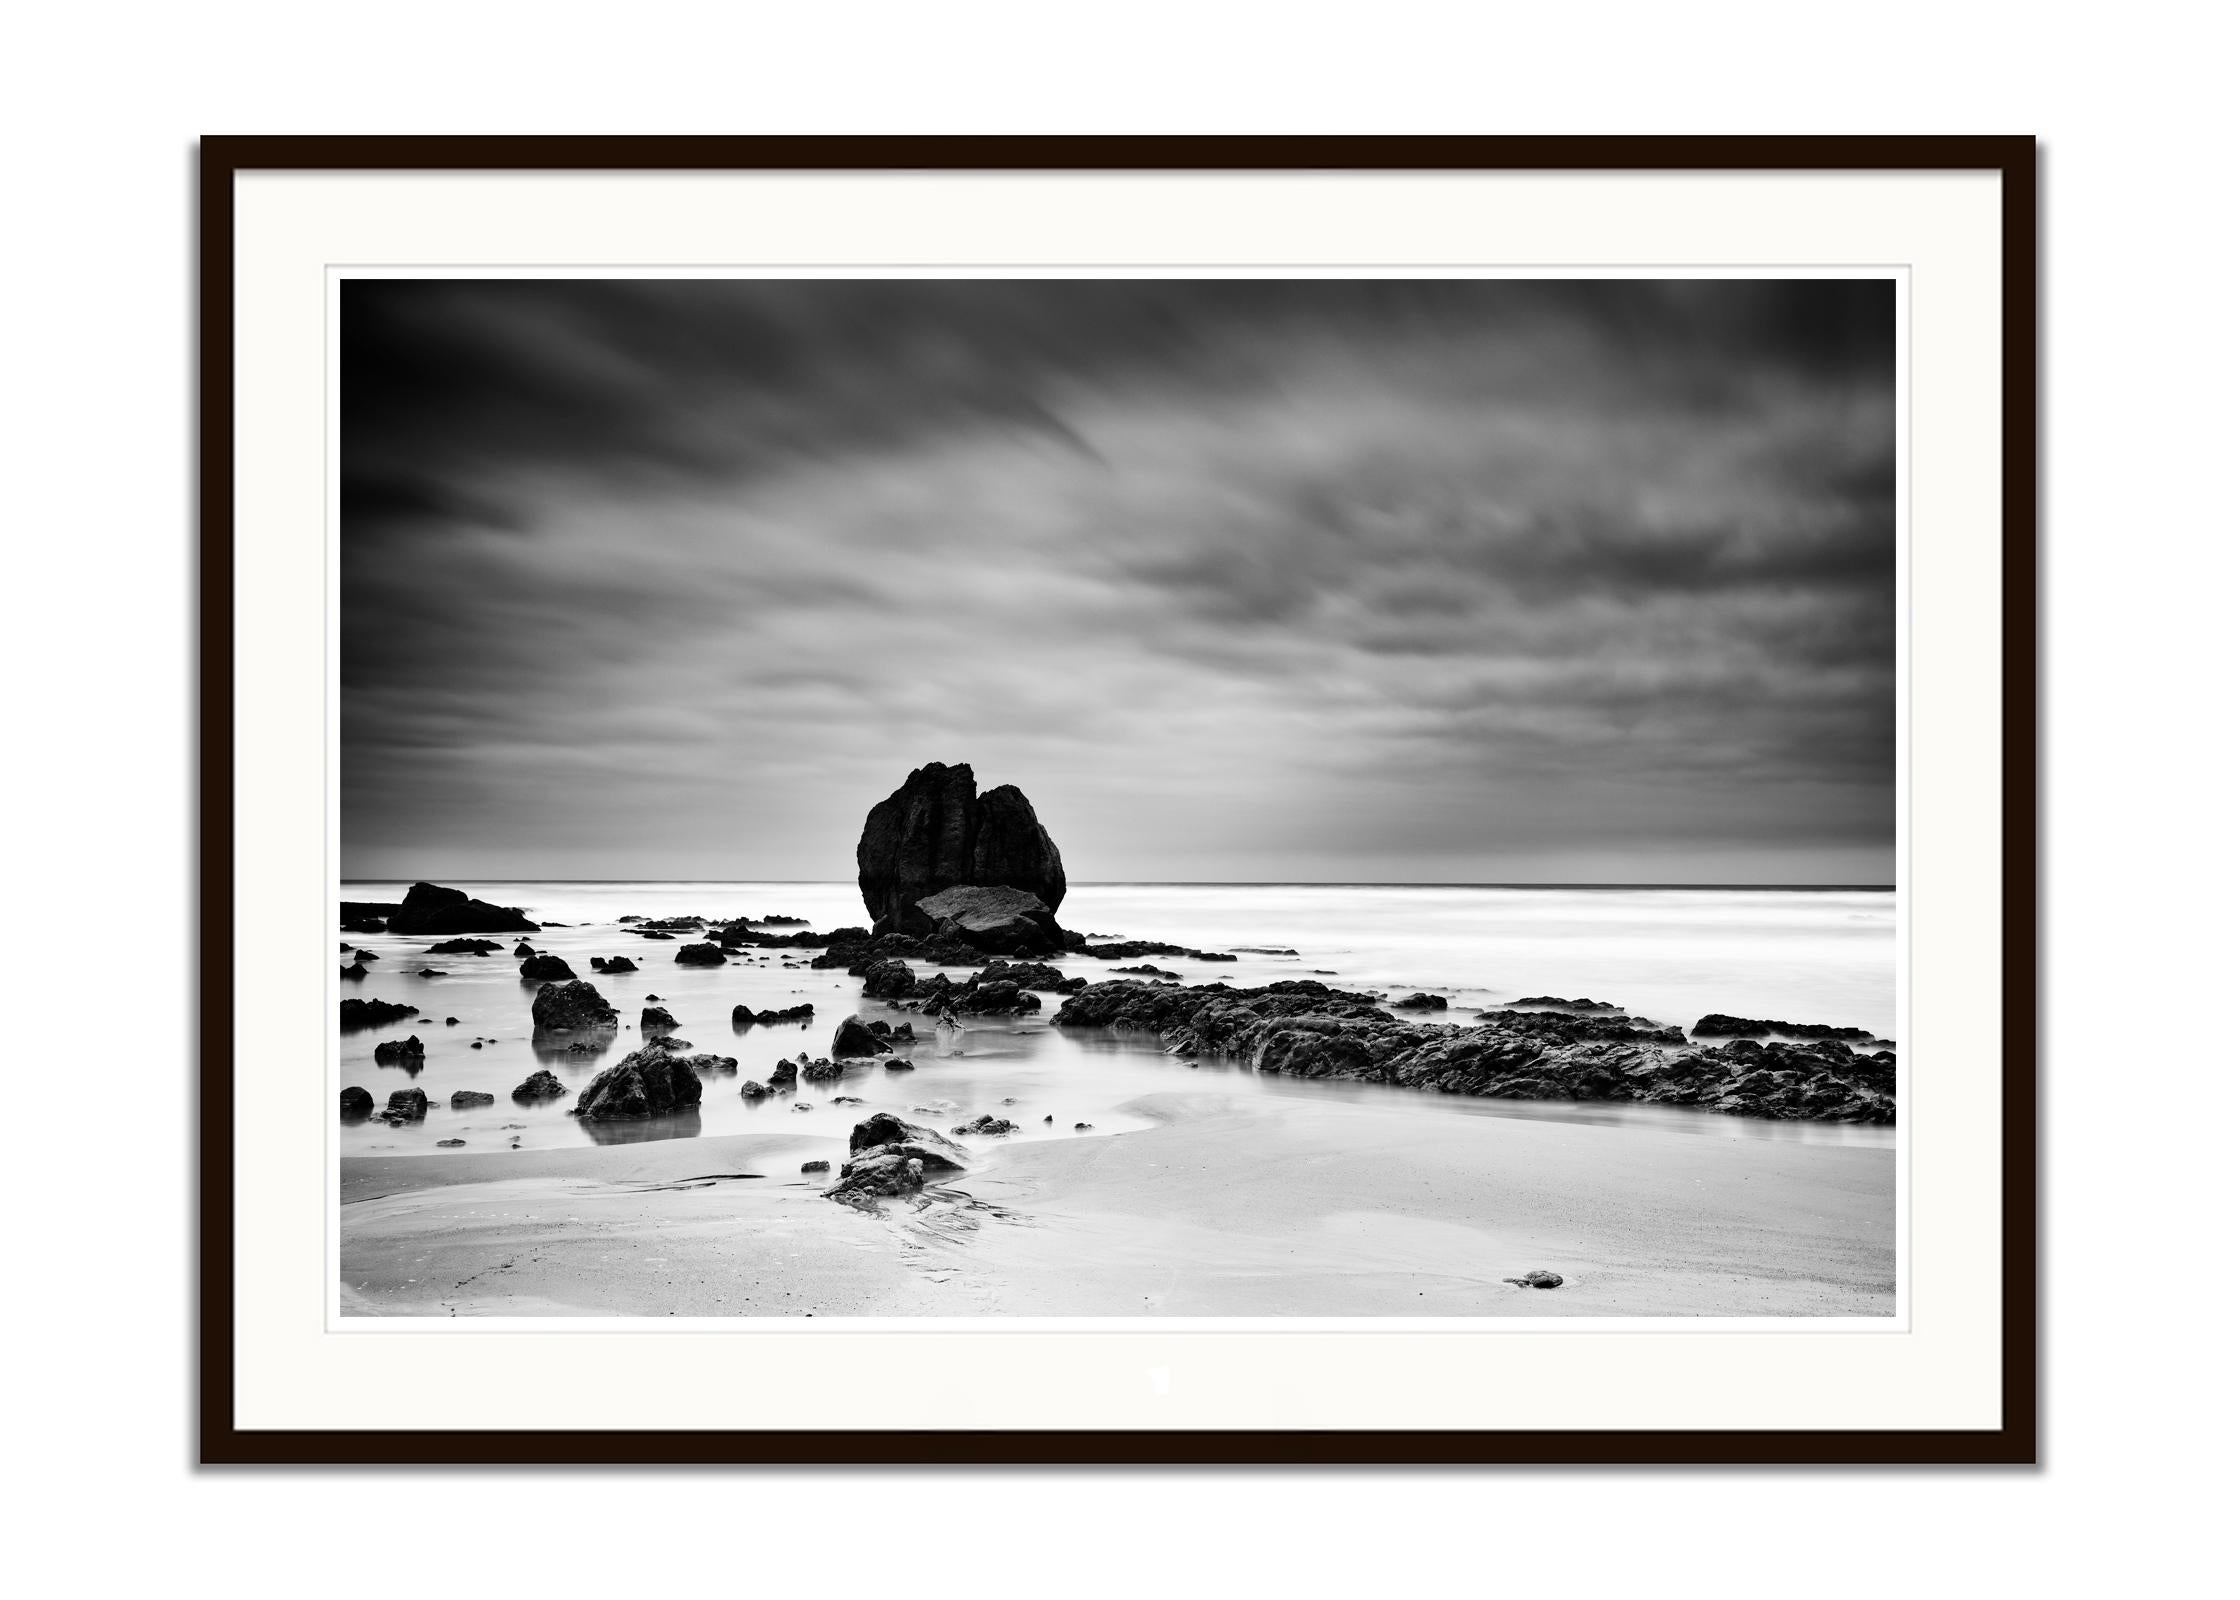 Black and white fine art panorama long exposure waterscape - landscape photography print. Giant rocks on the sandy beach of the Atlantic coast in France. Archival pigment ink print, edition of 8. Signed, titled, dated and numbered by artist.